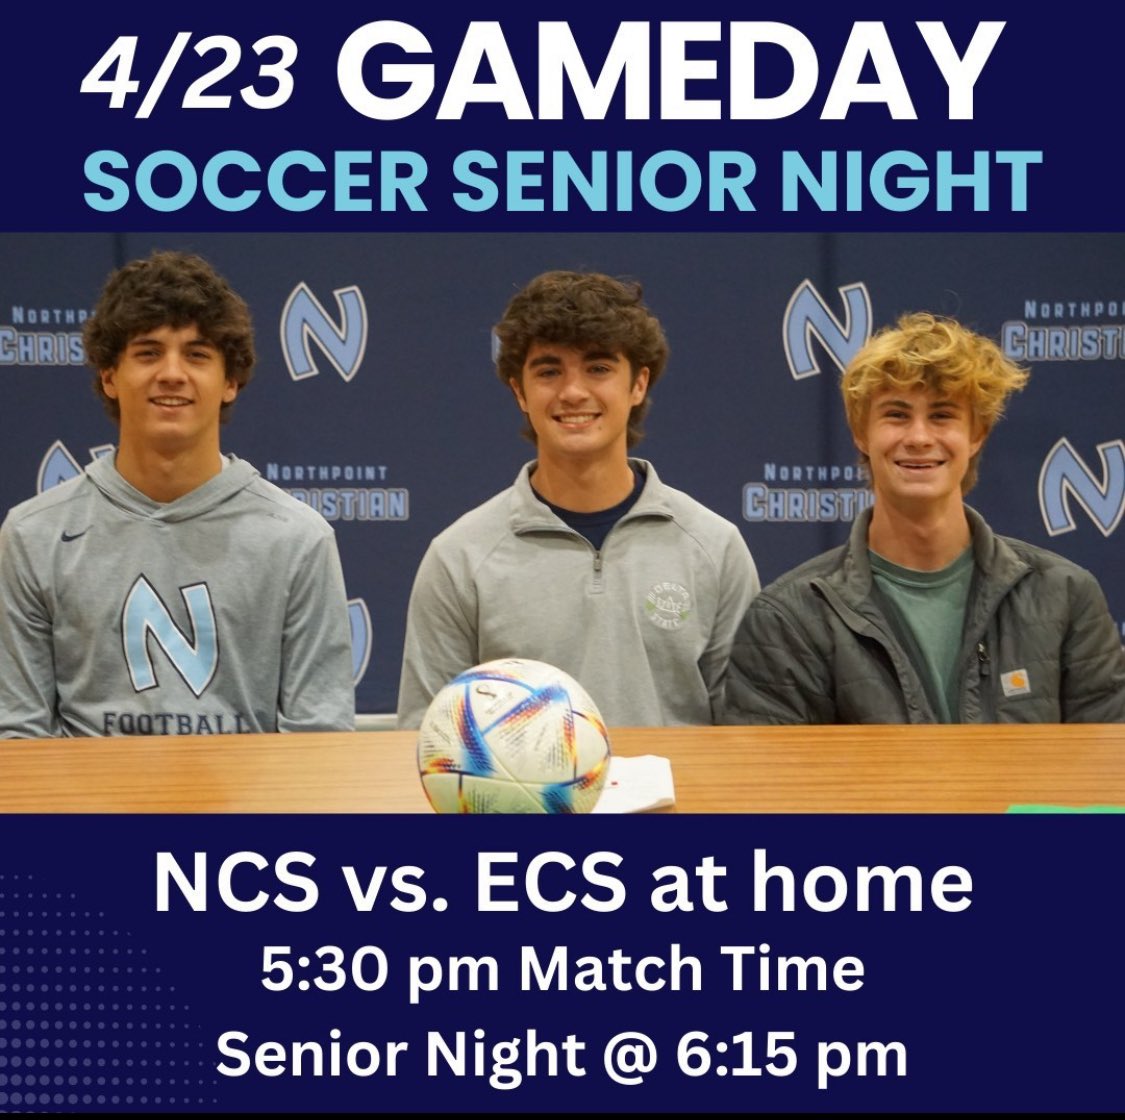 The NCS Soccer Team is having a fantastic season! They host ECS tonight at 5:30 pm for a HUGE Game. Winner secures second place in the district. Additionally, tonight is SENIOR NIGHT at 6:15 pm for Charlie Parolli, Eli Bailey, and Brodie Erber. Make plans to #PackThePoint.